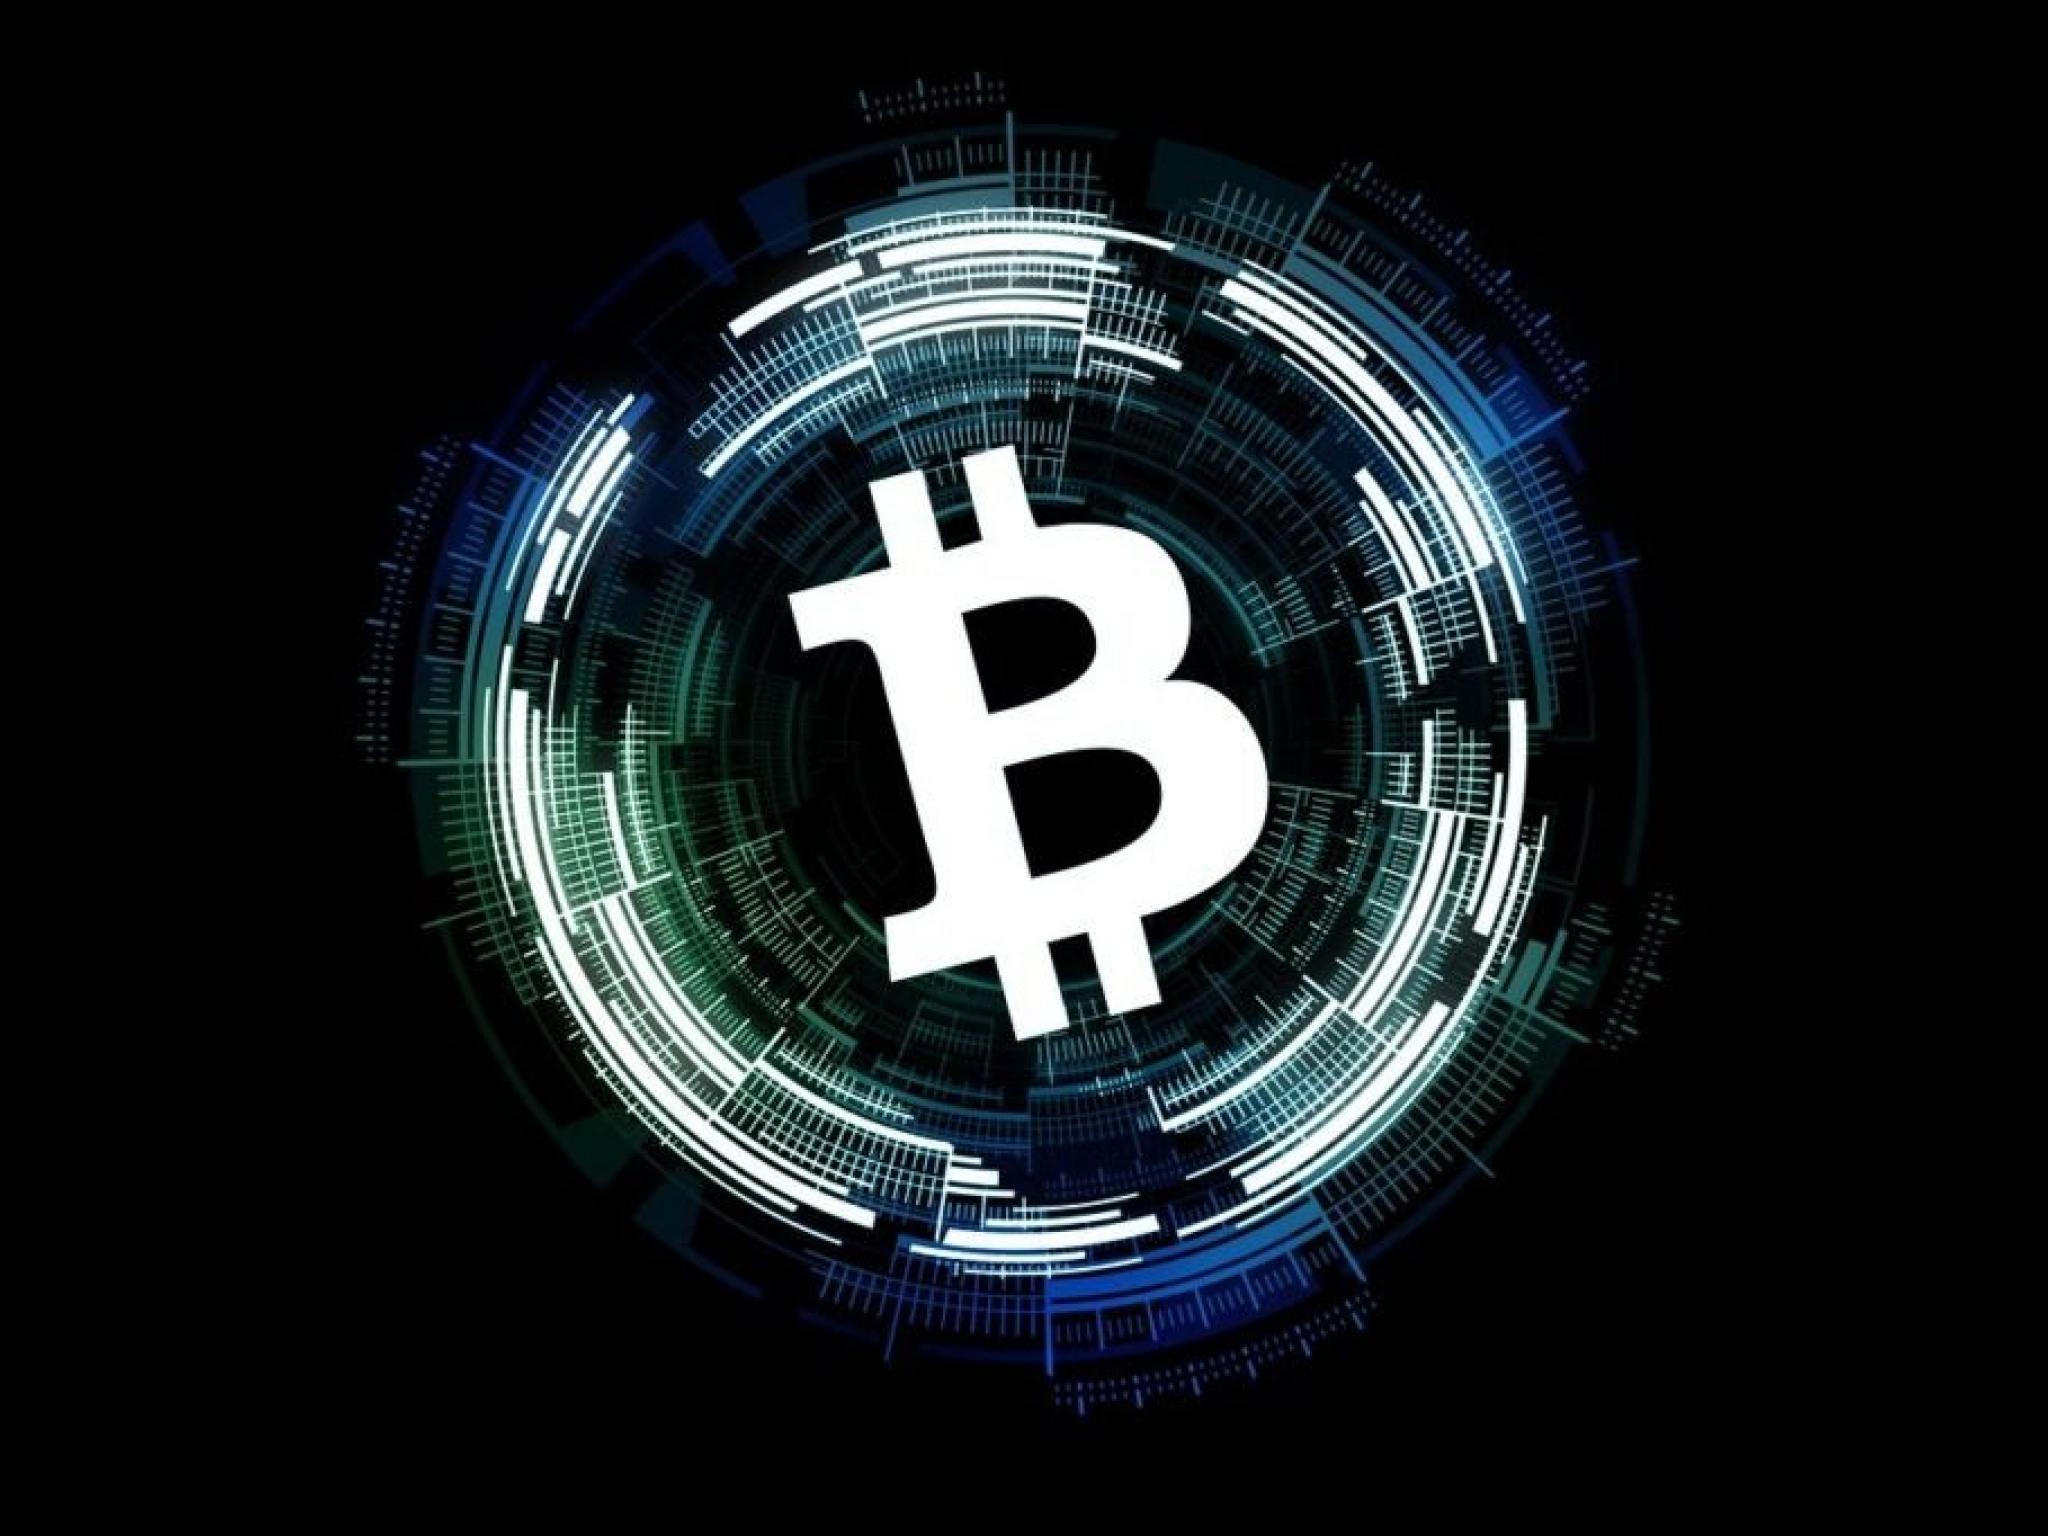  bitcoin-demand-from-us-investors-wanes-zoom-out-and-size-accordingly-expert-tells-benzinga 